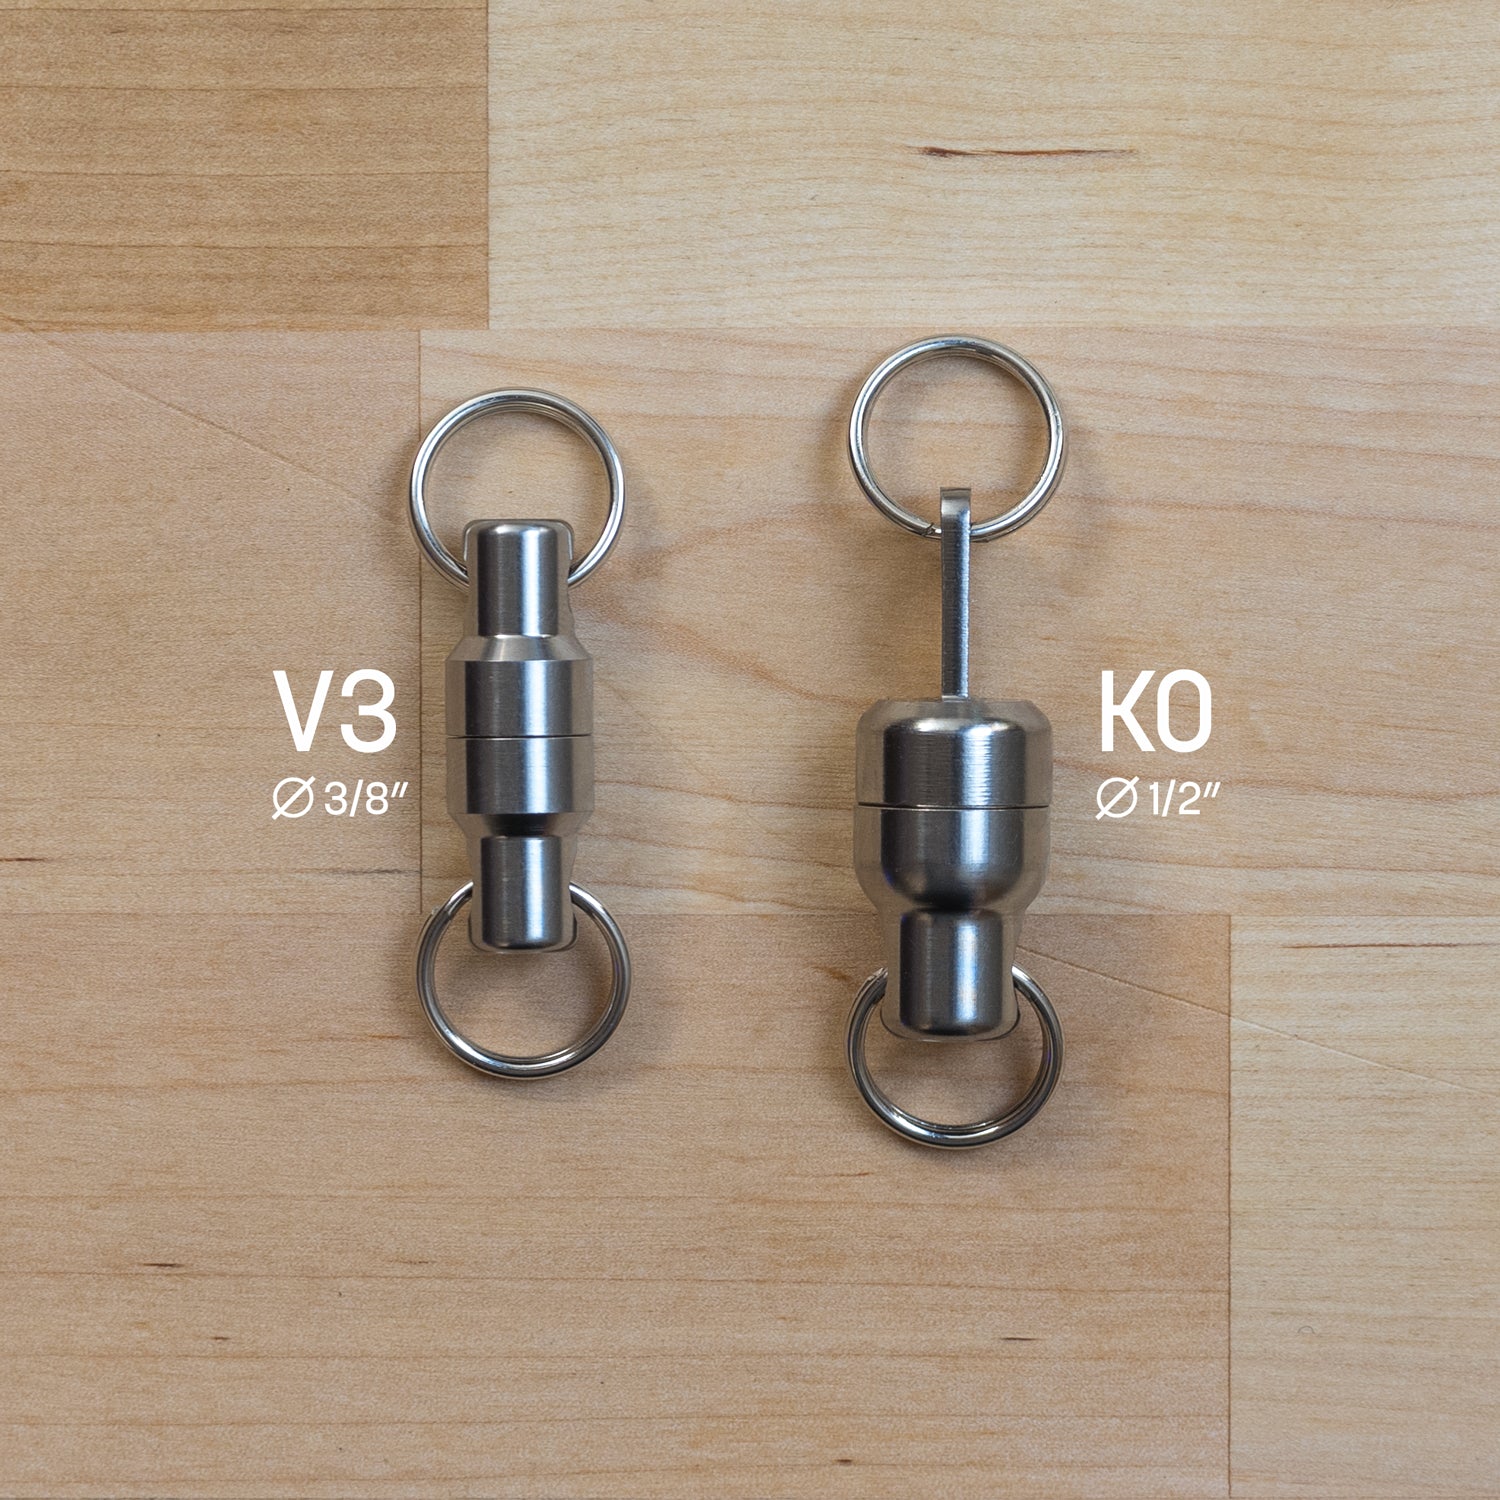 NEW! V3 Titanium Quick Release by Urban Carvers